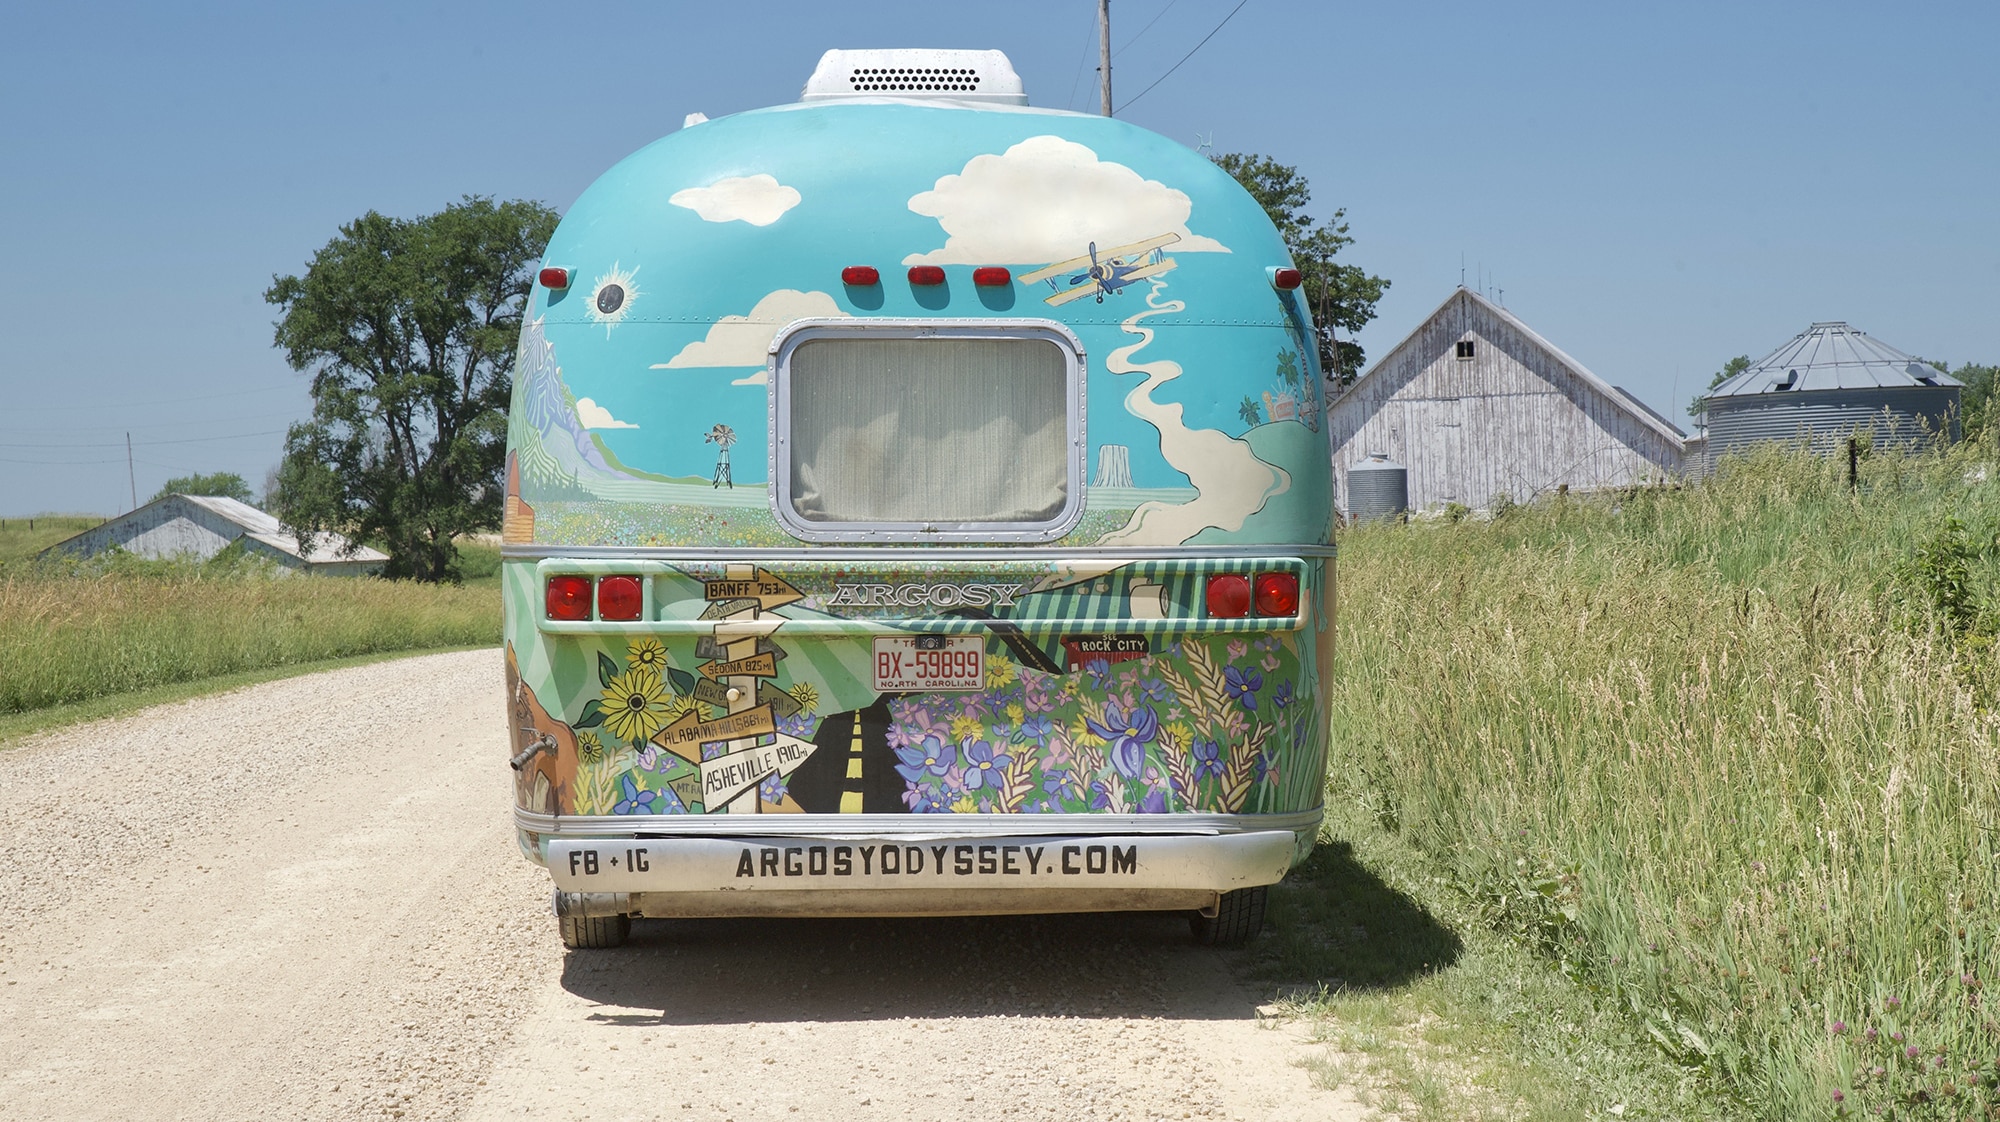 Colorful Airstream trailer parked on side of dirt road.